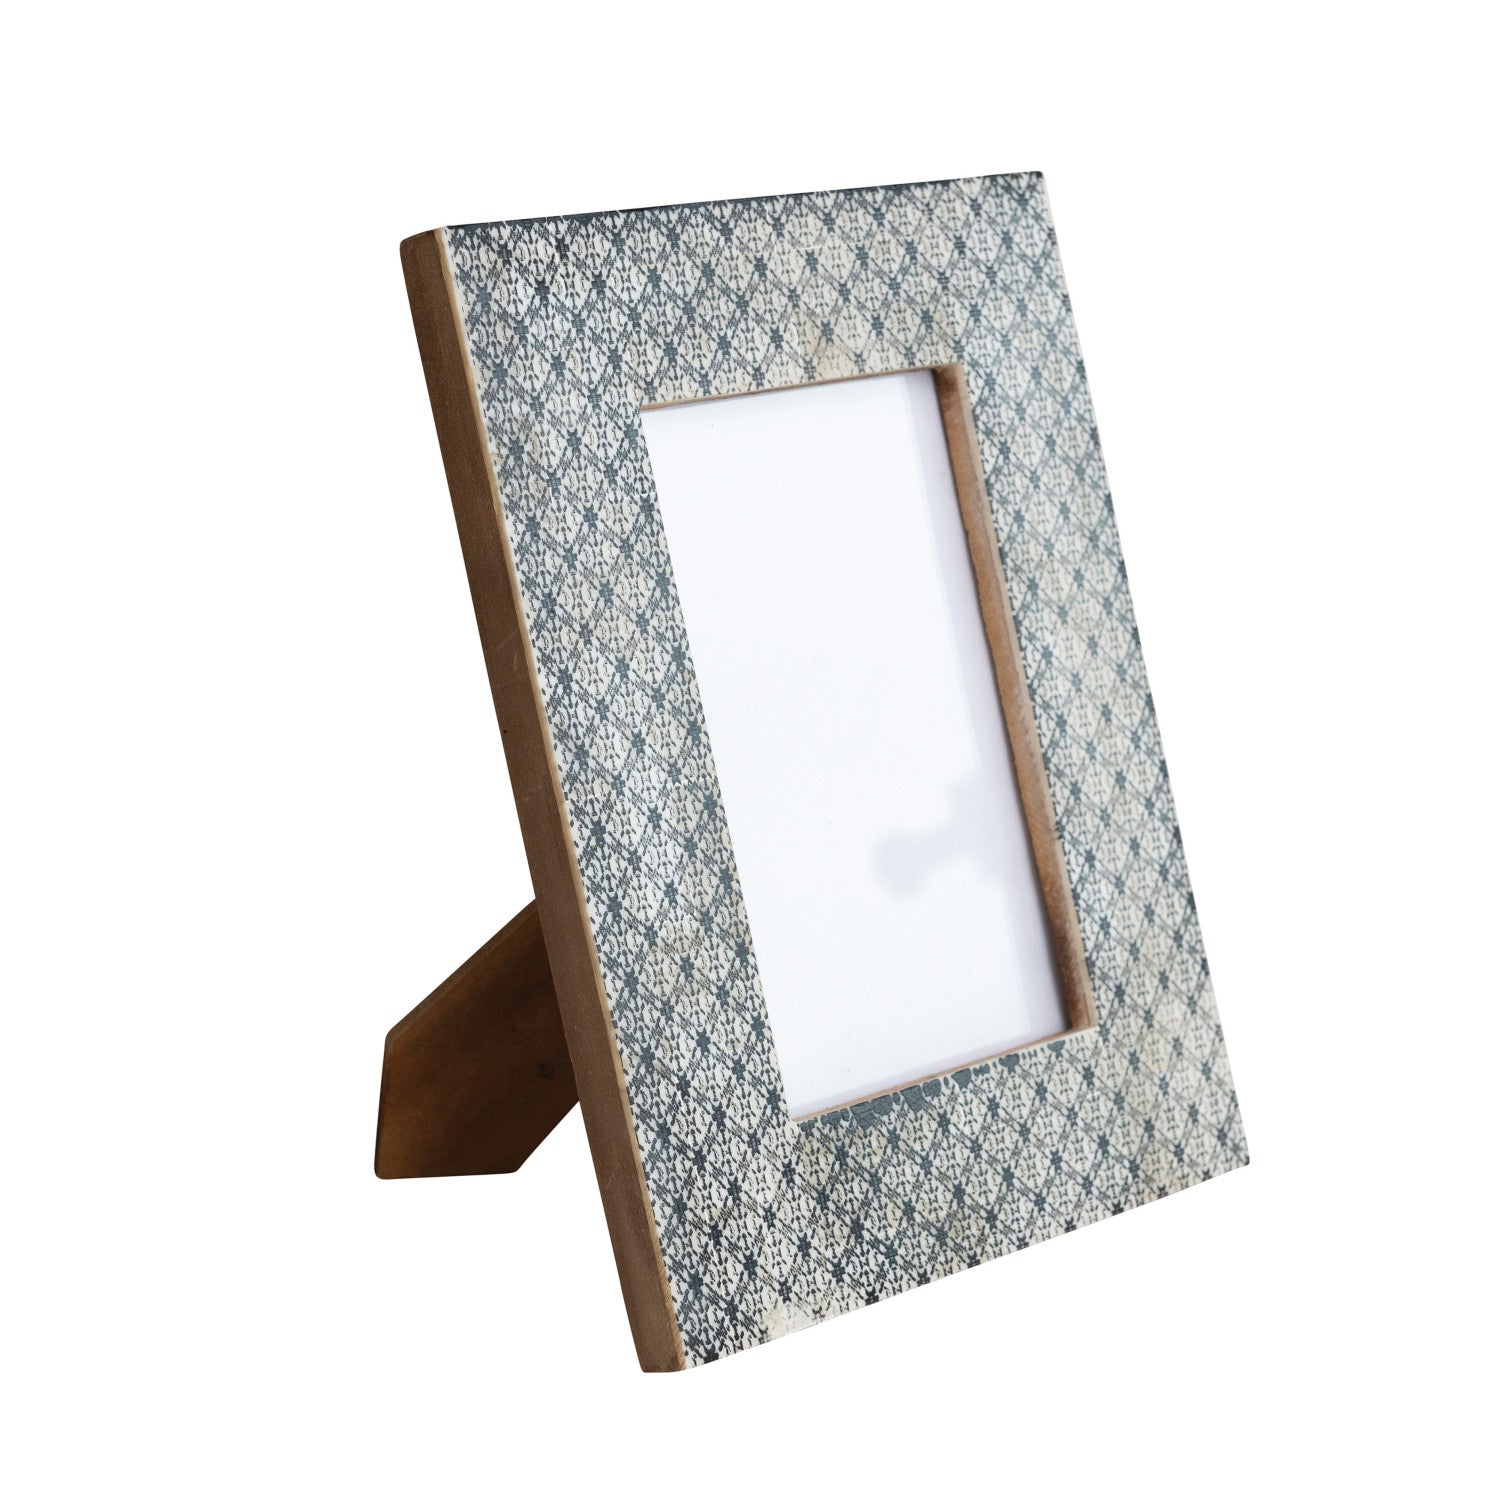 Charcoal Patterned Picture Frame